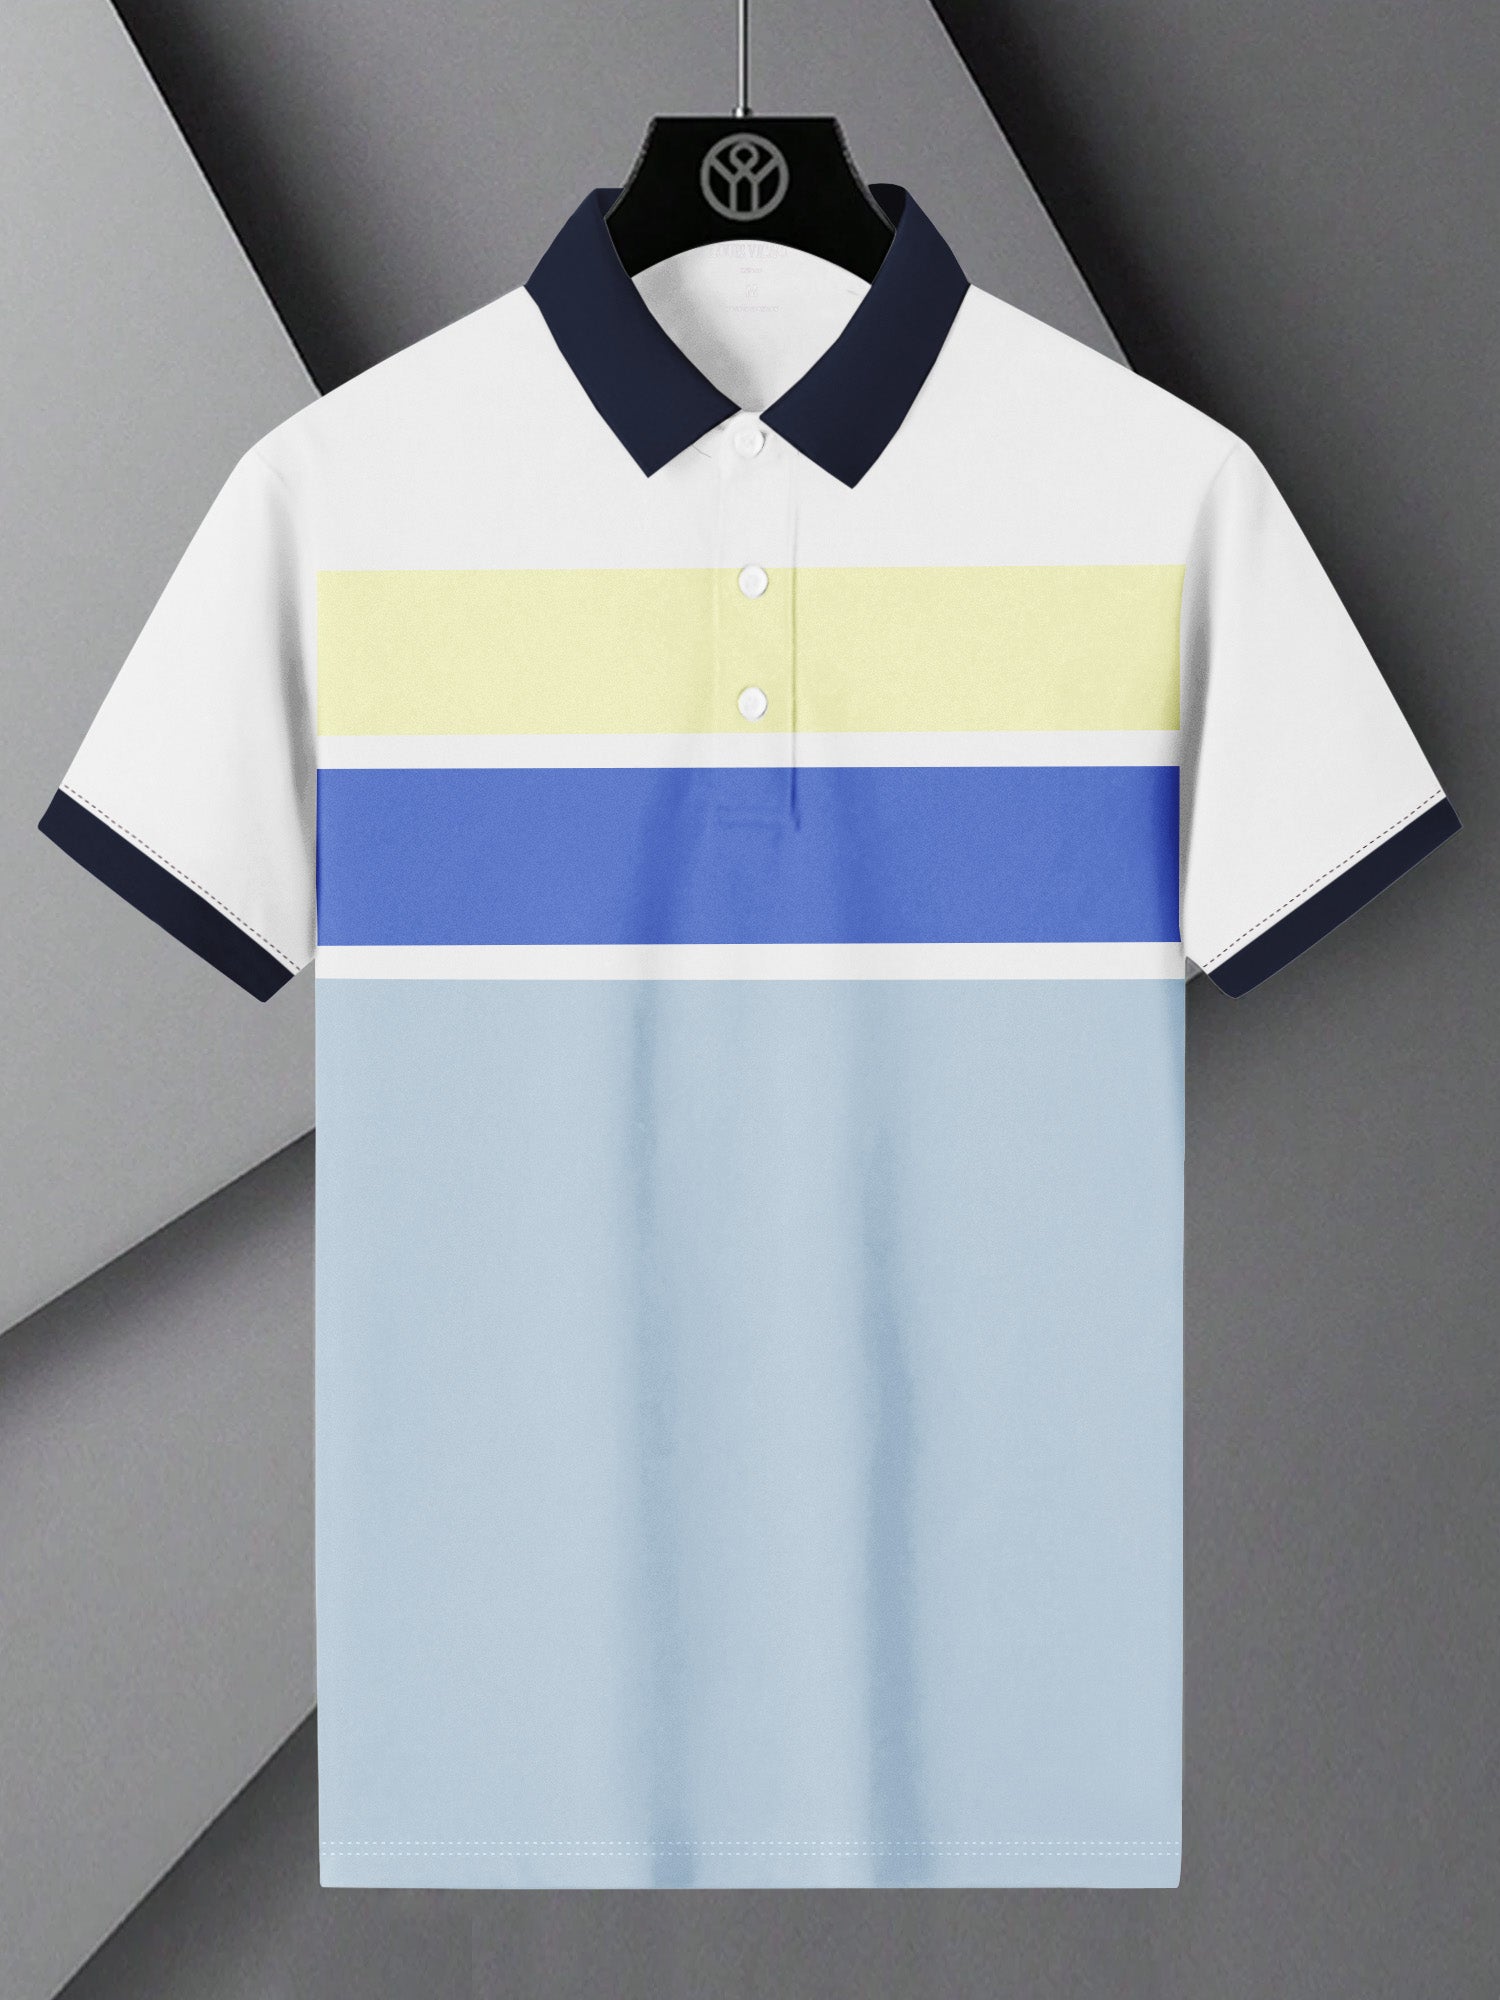 NXT Summer Polo Shirt For Men-White with Blue & Yellow Stripe-BE814/BR13055